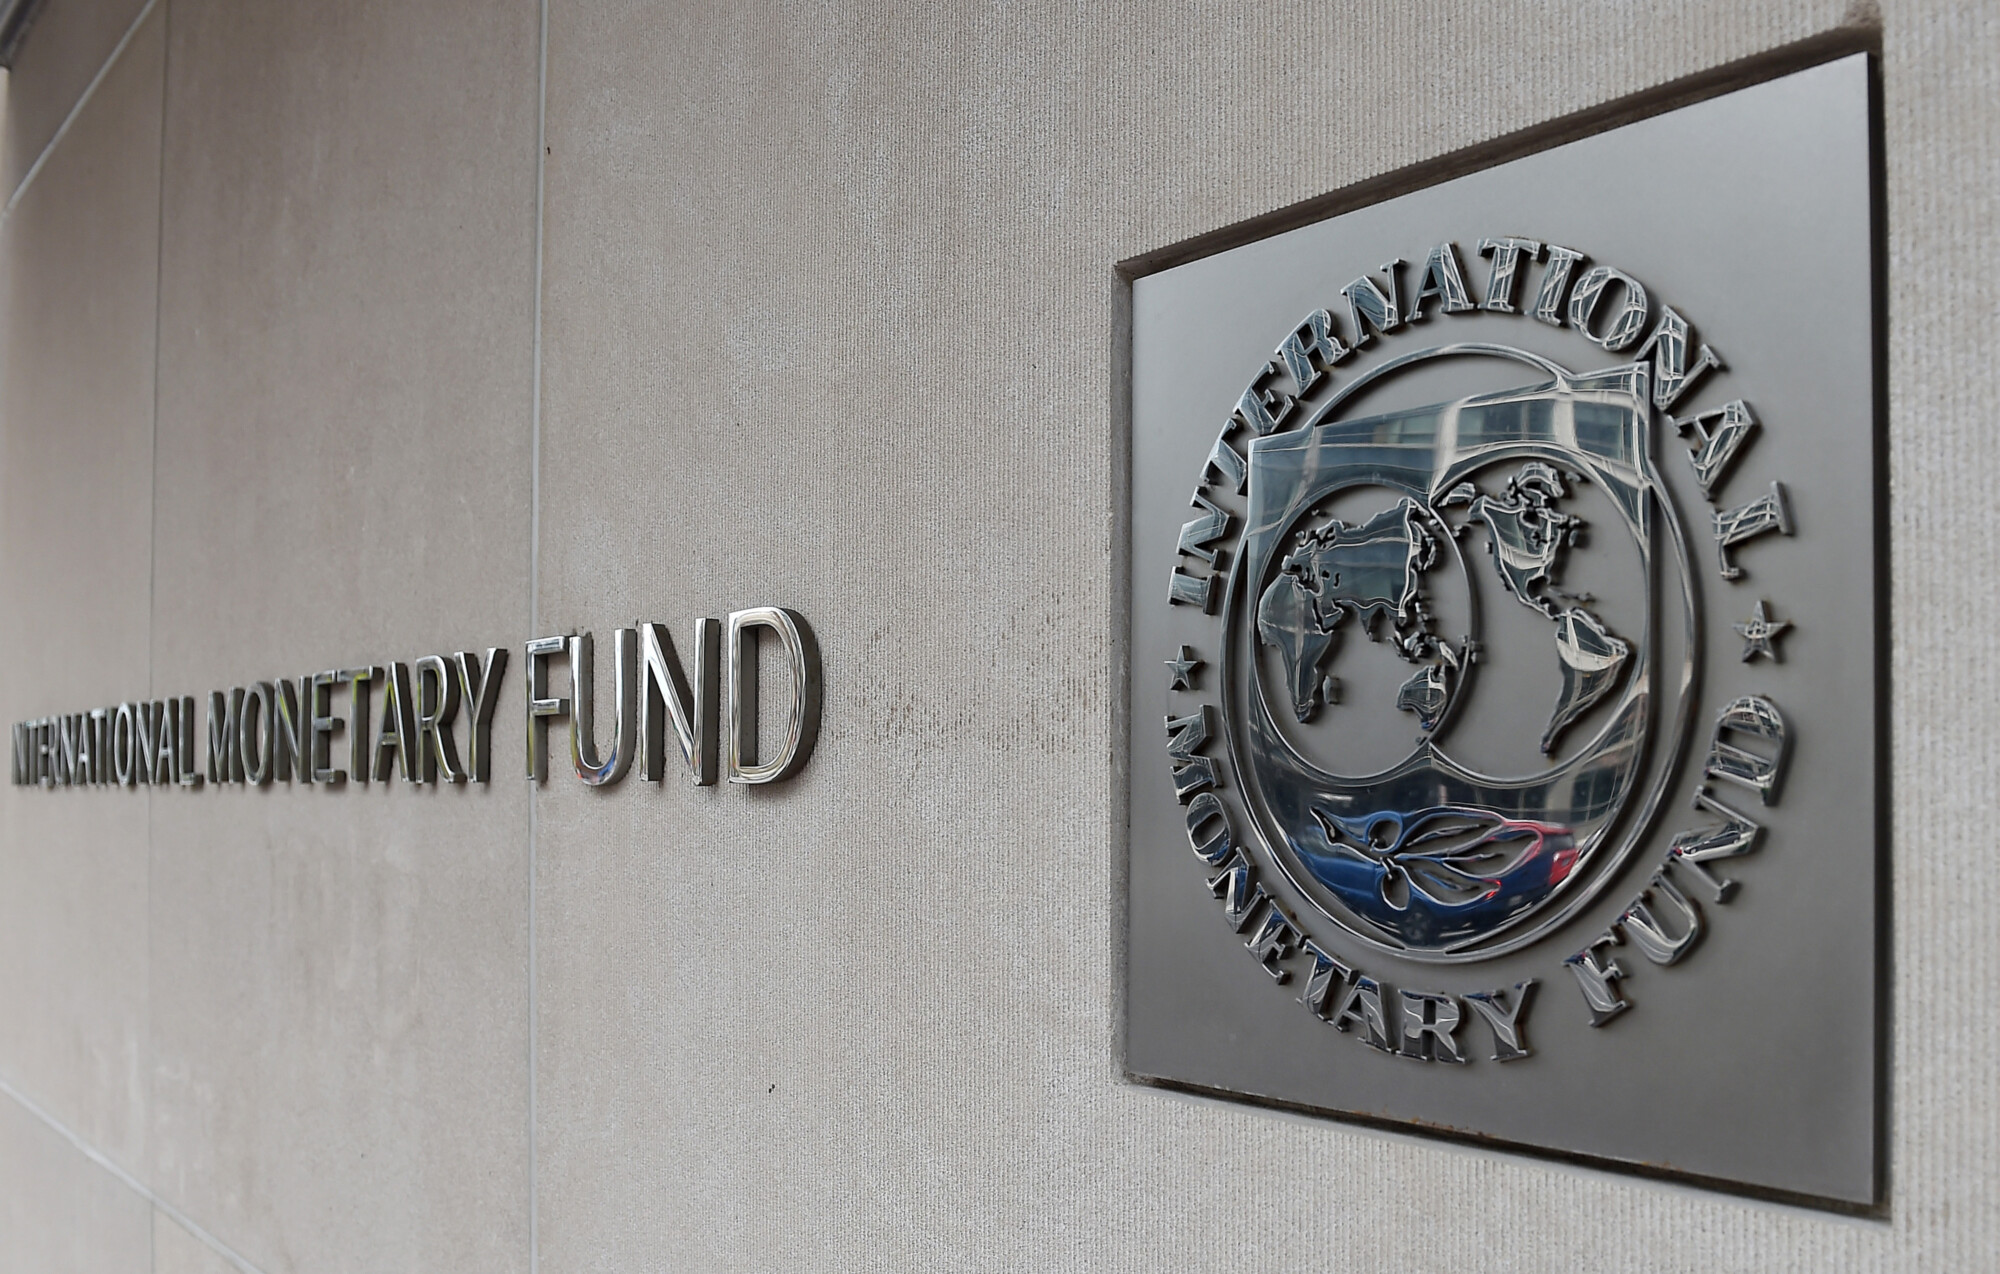 IMF Giving Governments More Money to Spend, Tells Countries to Spend ‘Wisely’